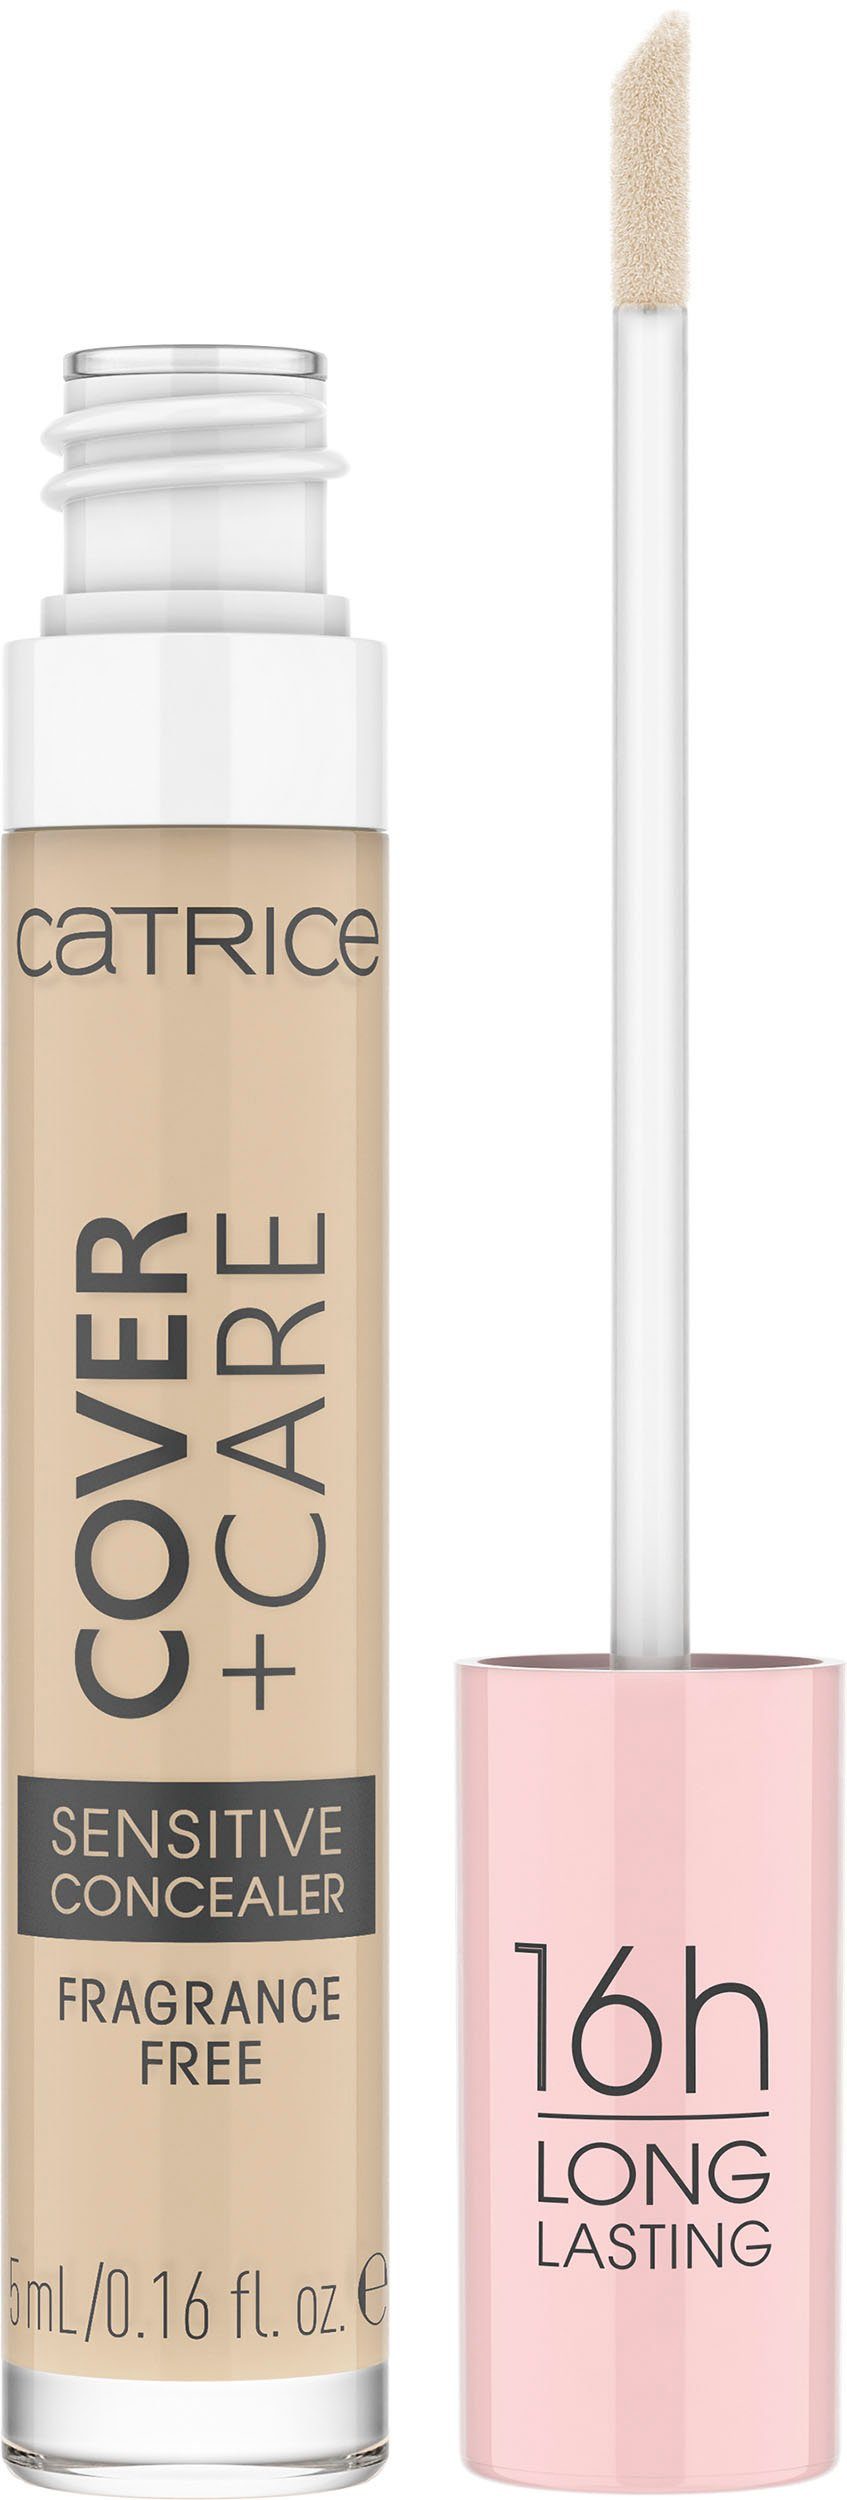 Sensitive Catrice Care 3-tlg. + nude Concealer Concealer, Cover 010C Catrice